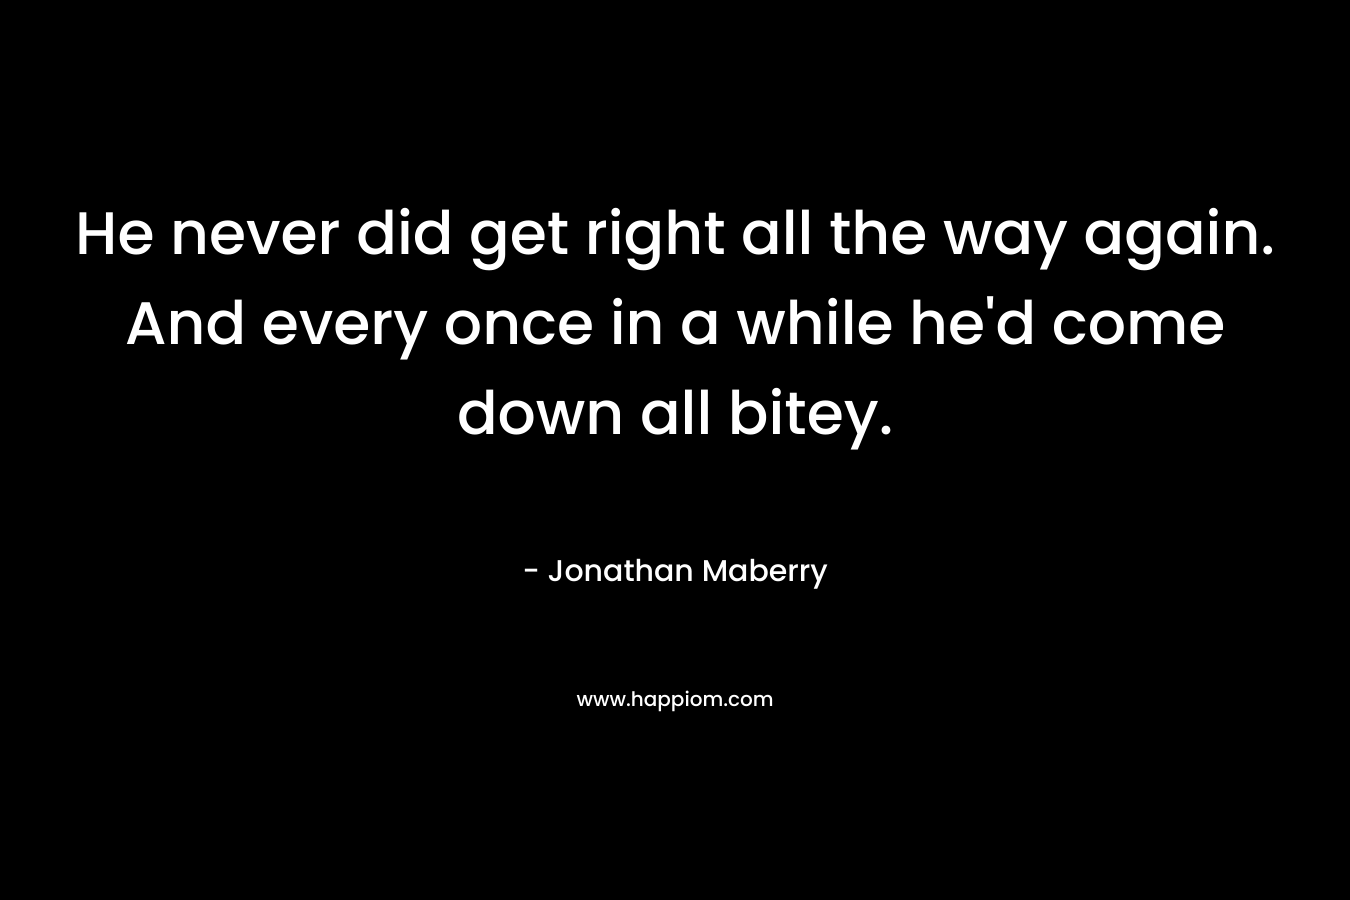 He never did get right all the way again. And every once in a while he’d come down all bitey. – Jonathan Maberry